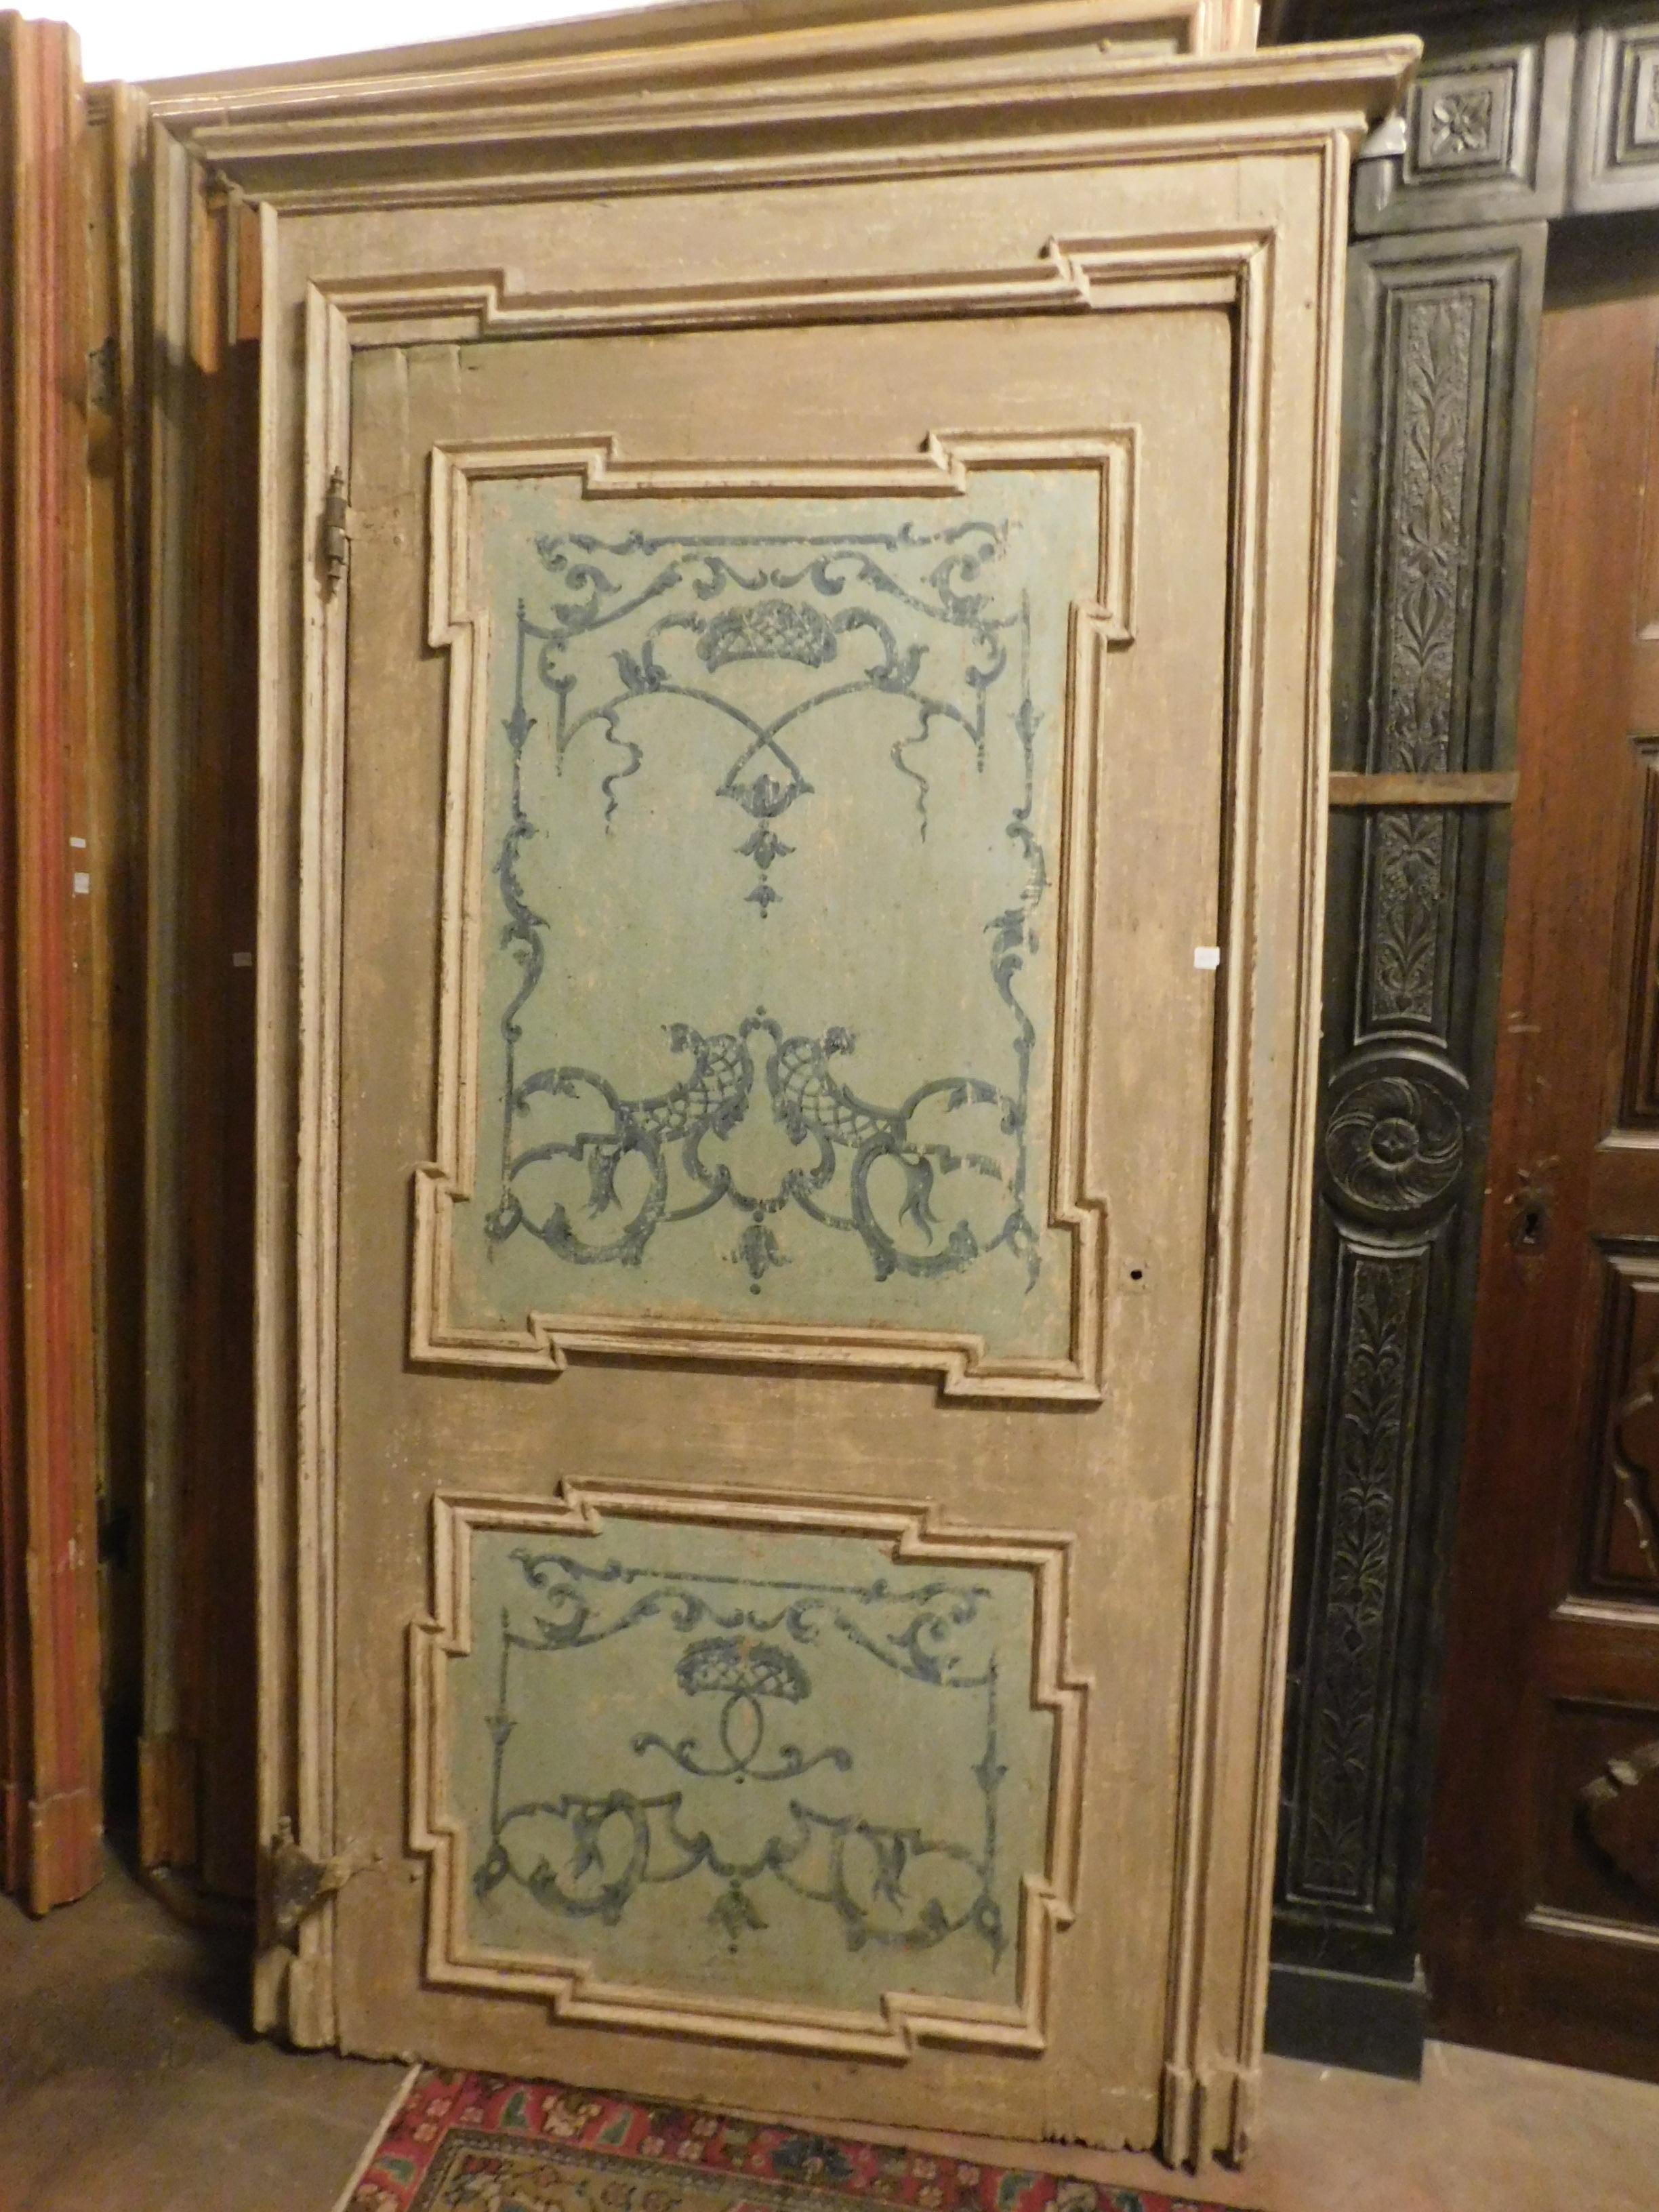 Antique lacquered and painted door, very elegant colors such as gray and blue, painted panels with contemporary motifs and original lacquered frame, to check the hardware, built entirely by hand in the 18th century, for a palace in Italy.
Painted